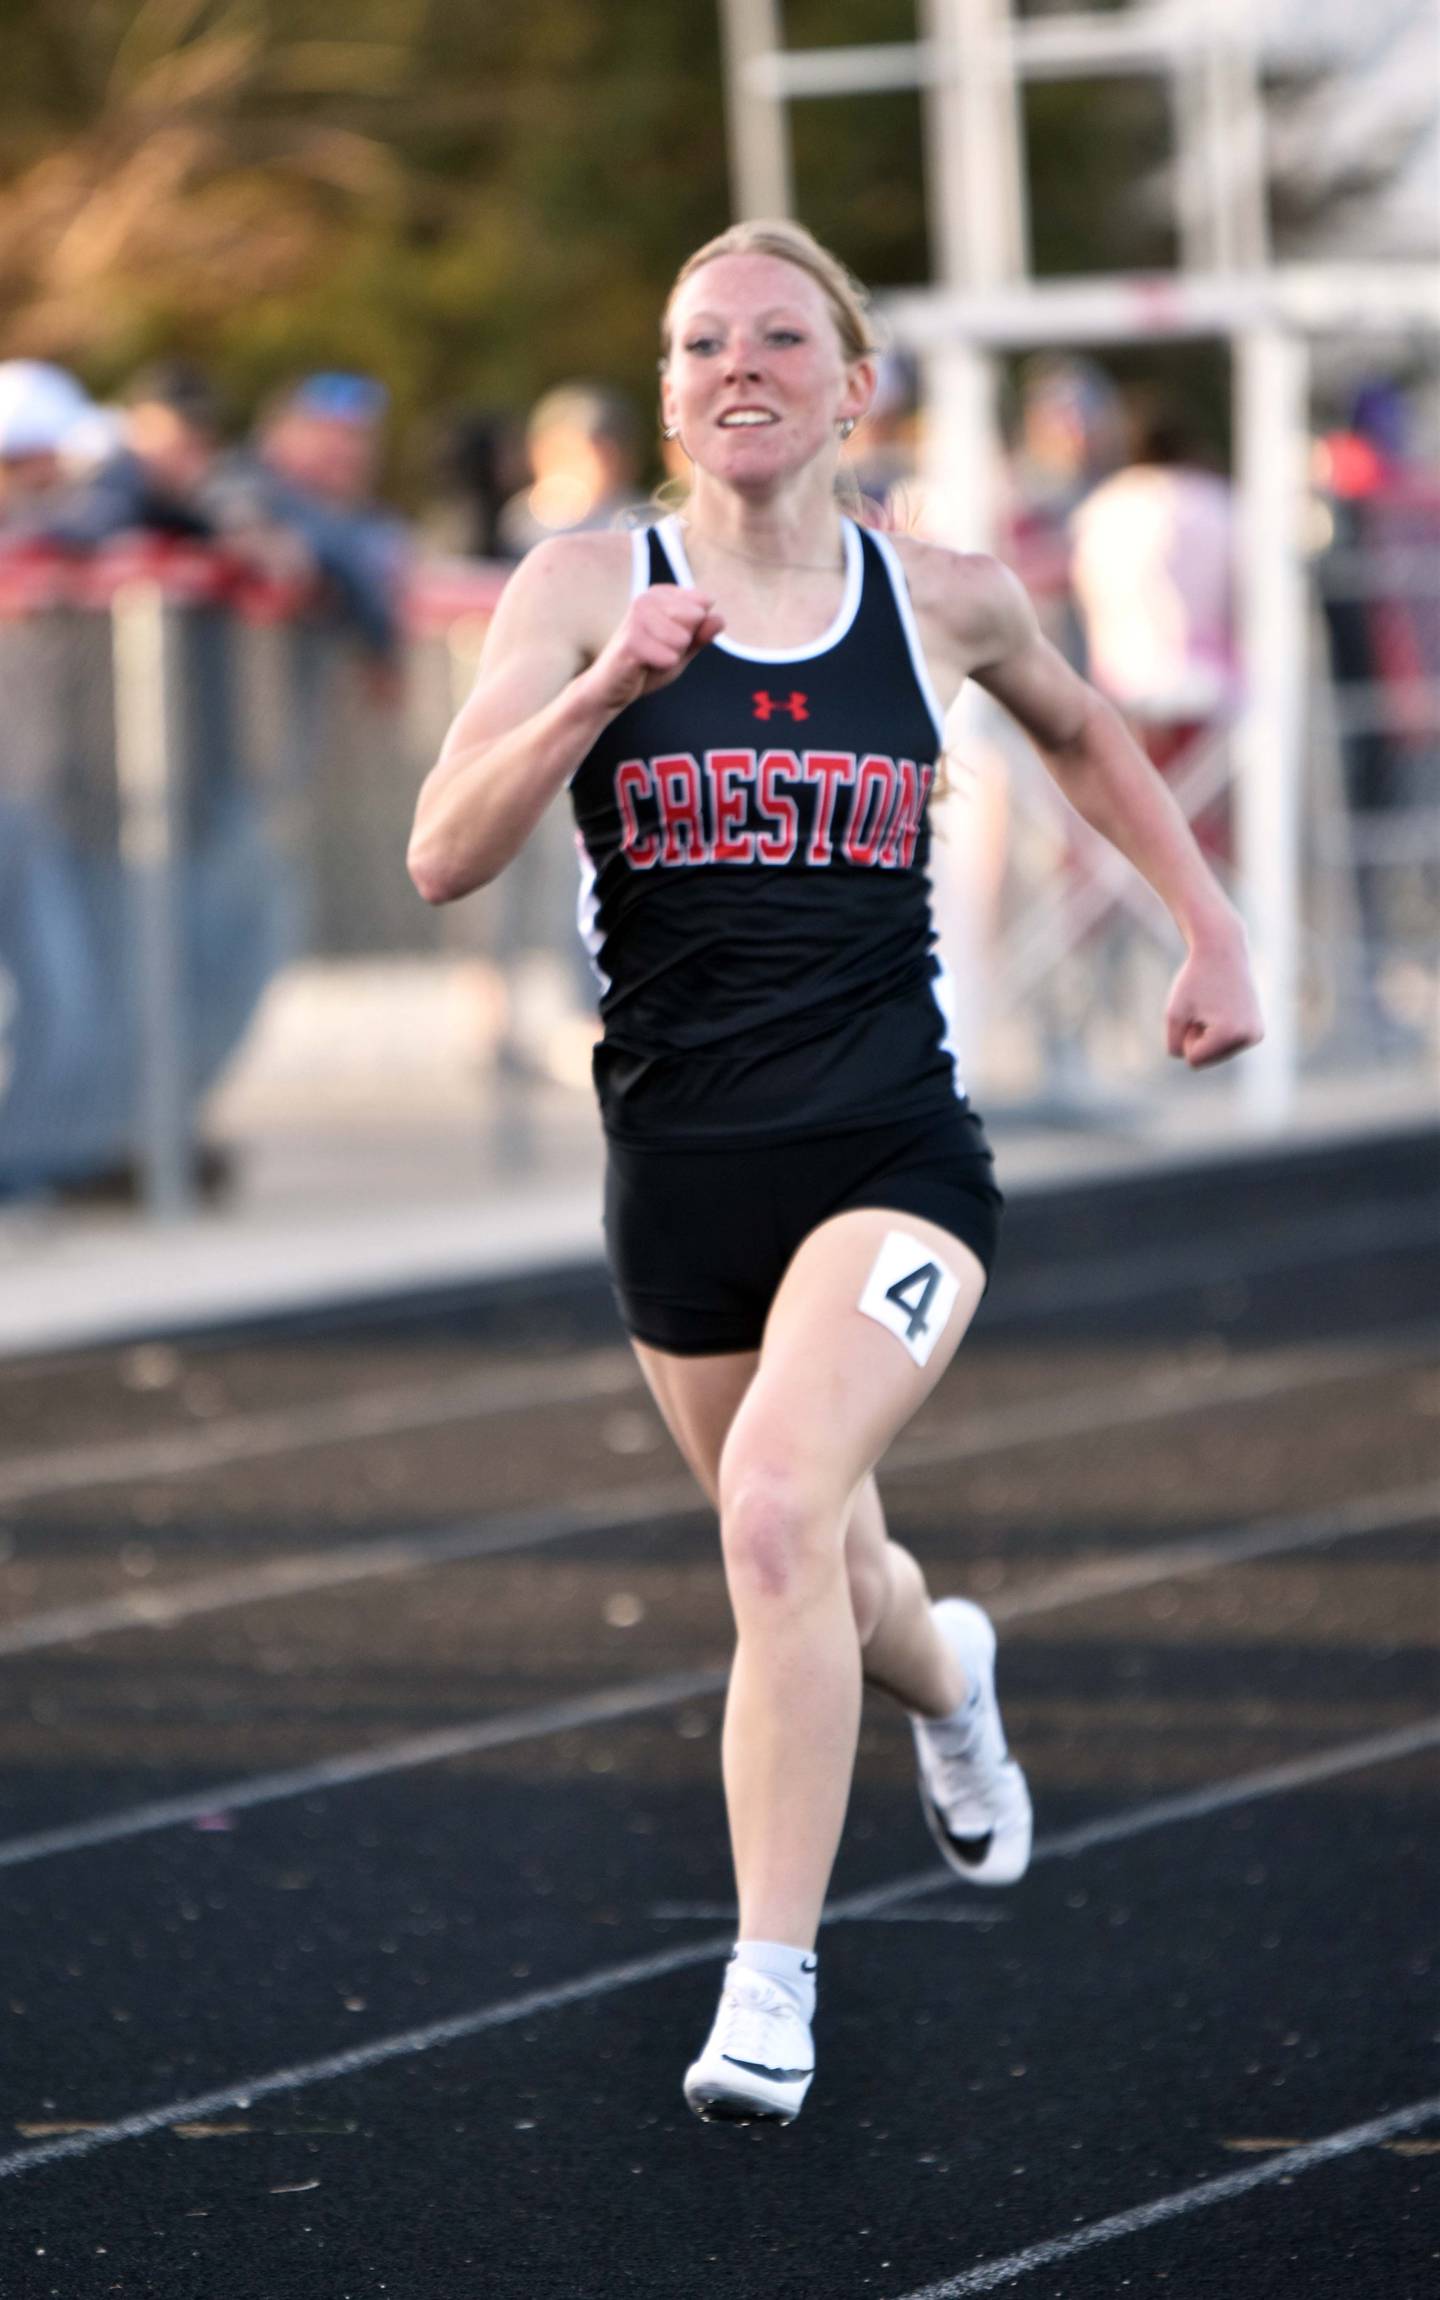 Creston’s Avery Staver wins the girls 400m dash Monday at the Creston Coed in a time of 1:02.53.